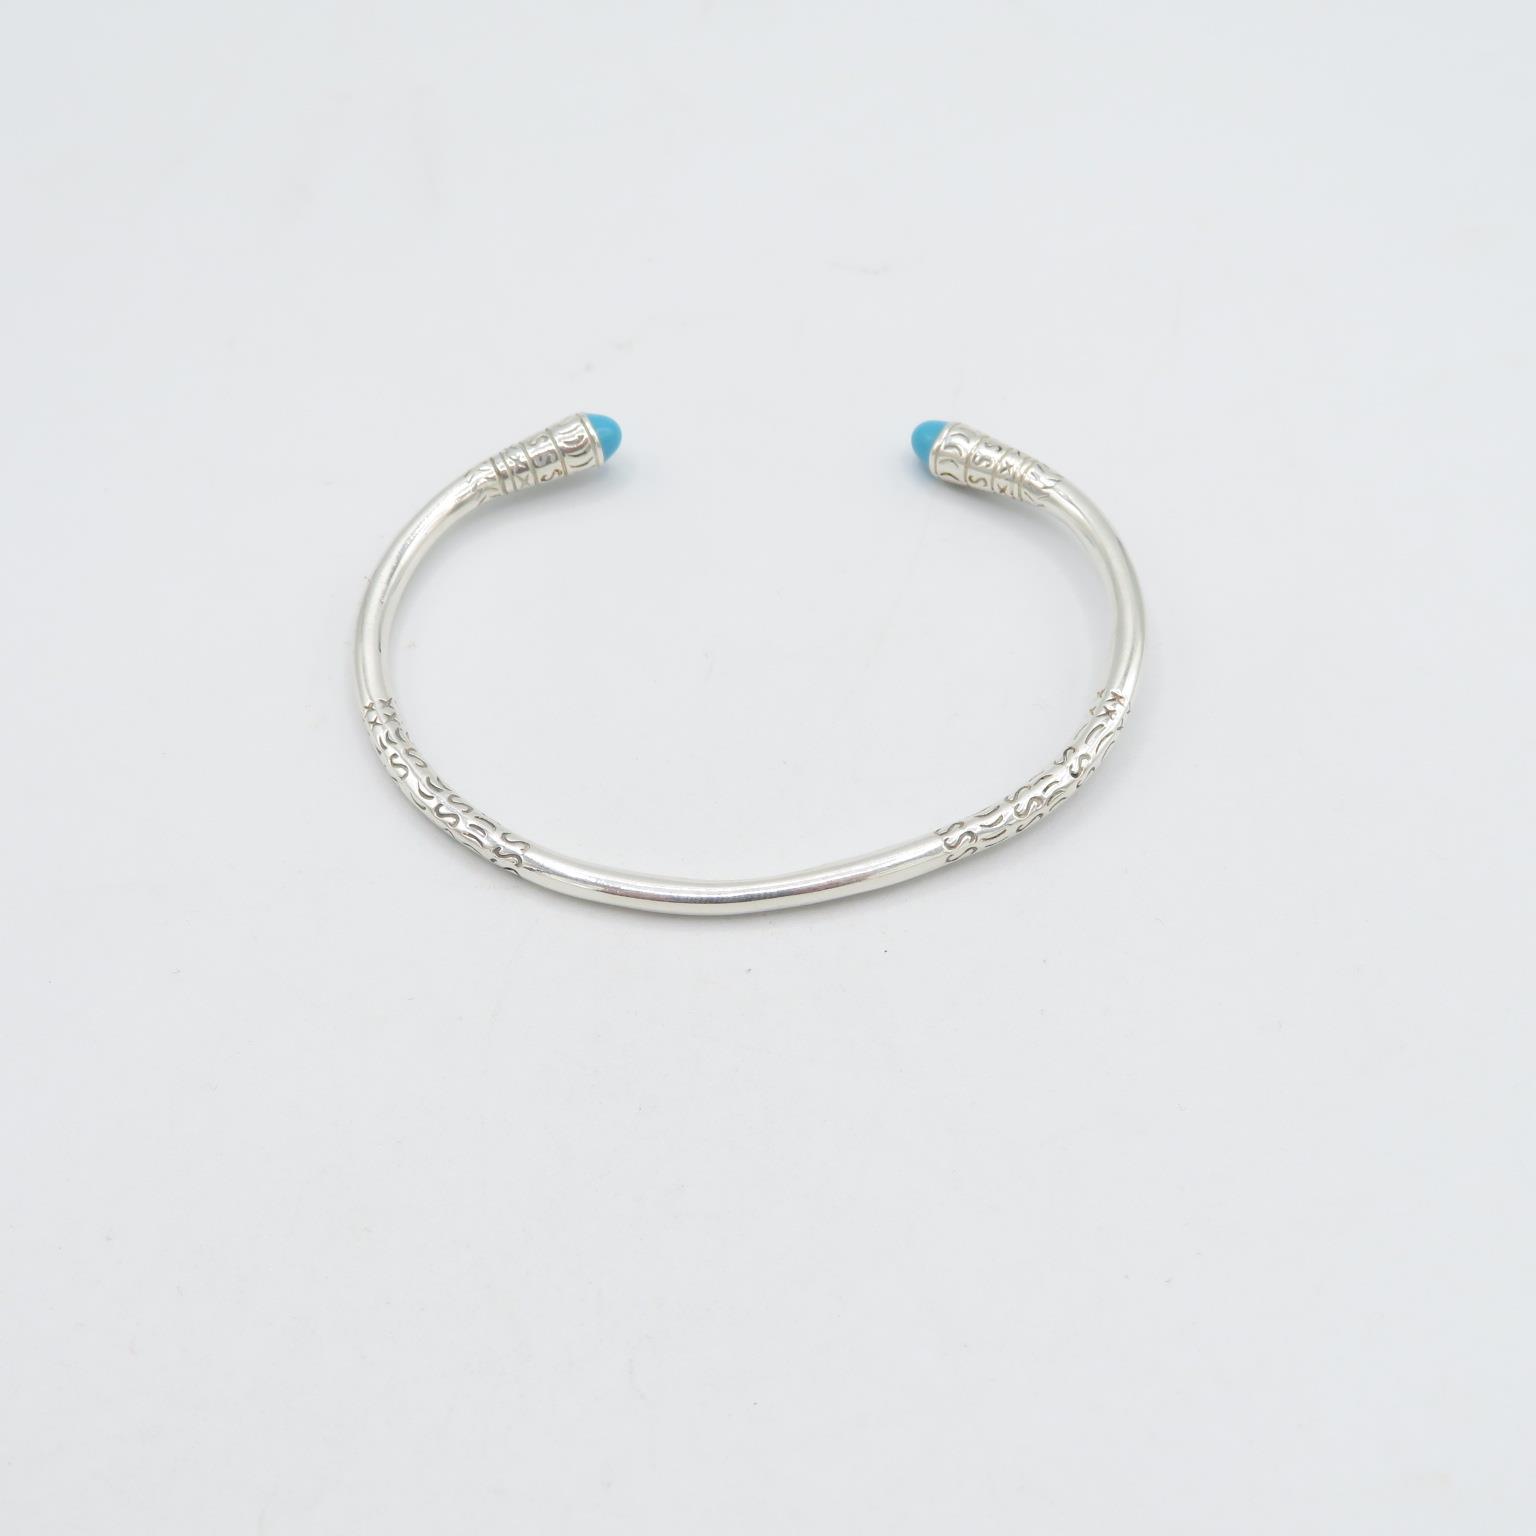 HM 925 Sterling Silver engraved bangle set with turquoise stones - adjustable - (20g) In excellent - Image 2 of 5